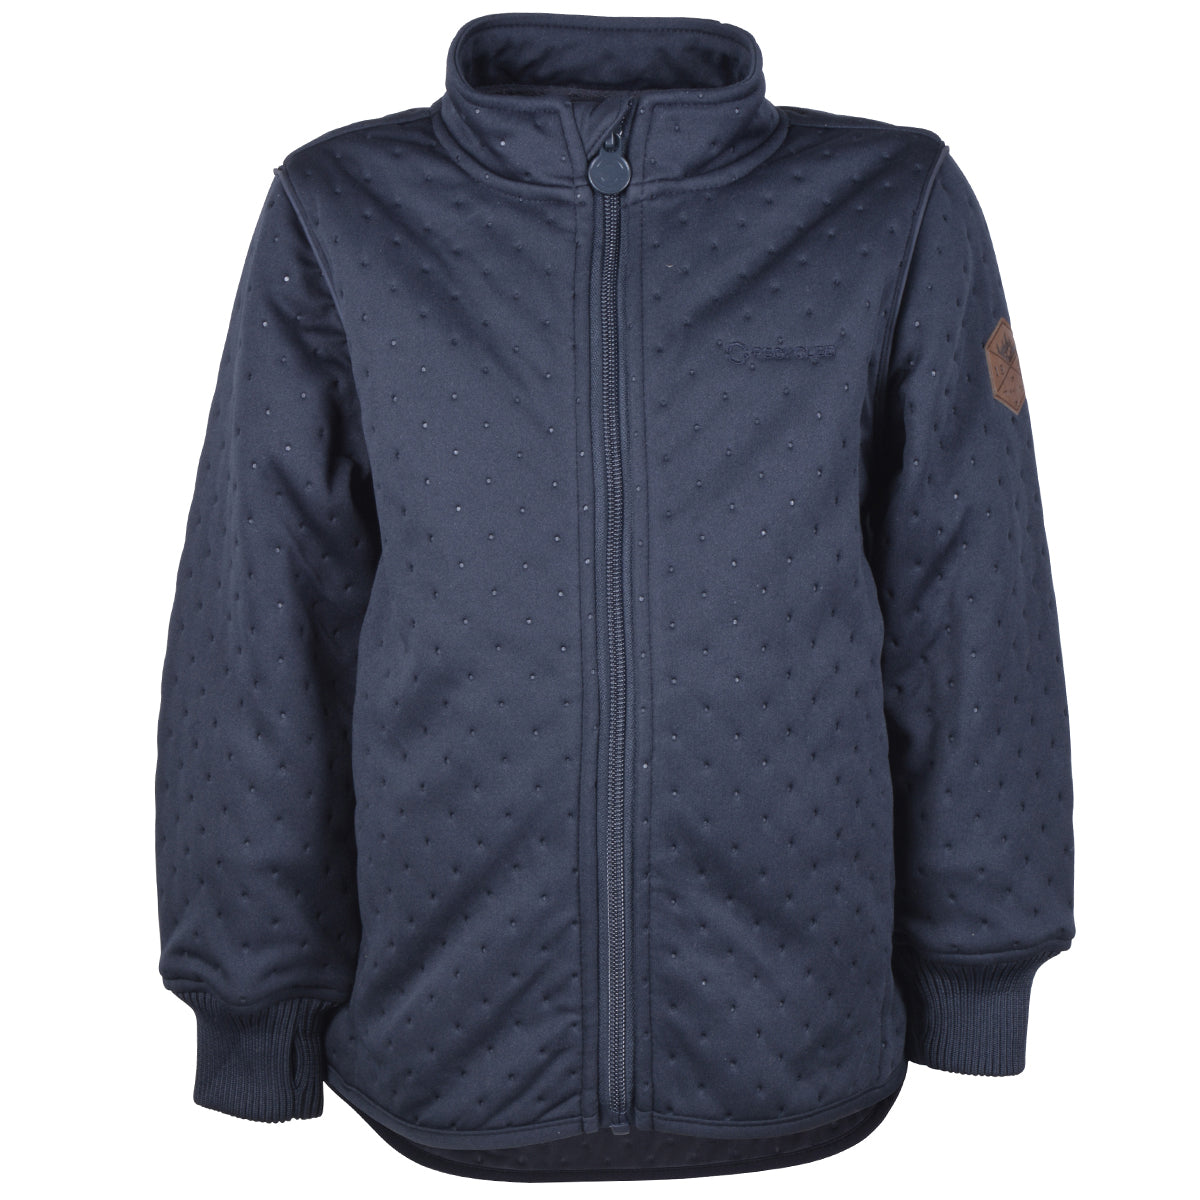 Mikk-Line - Soft Thermo Boy Jacket, Recycled - Blue Nights